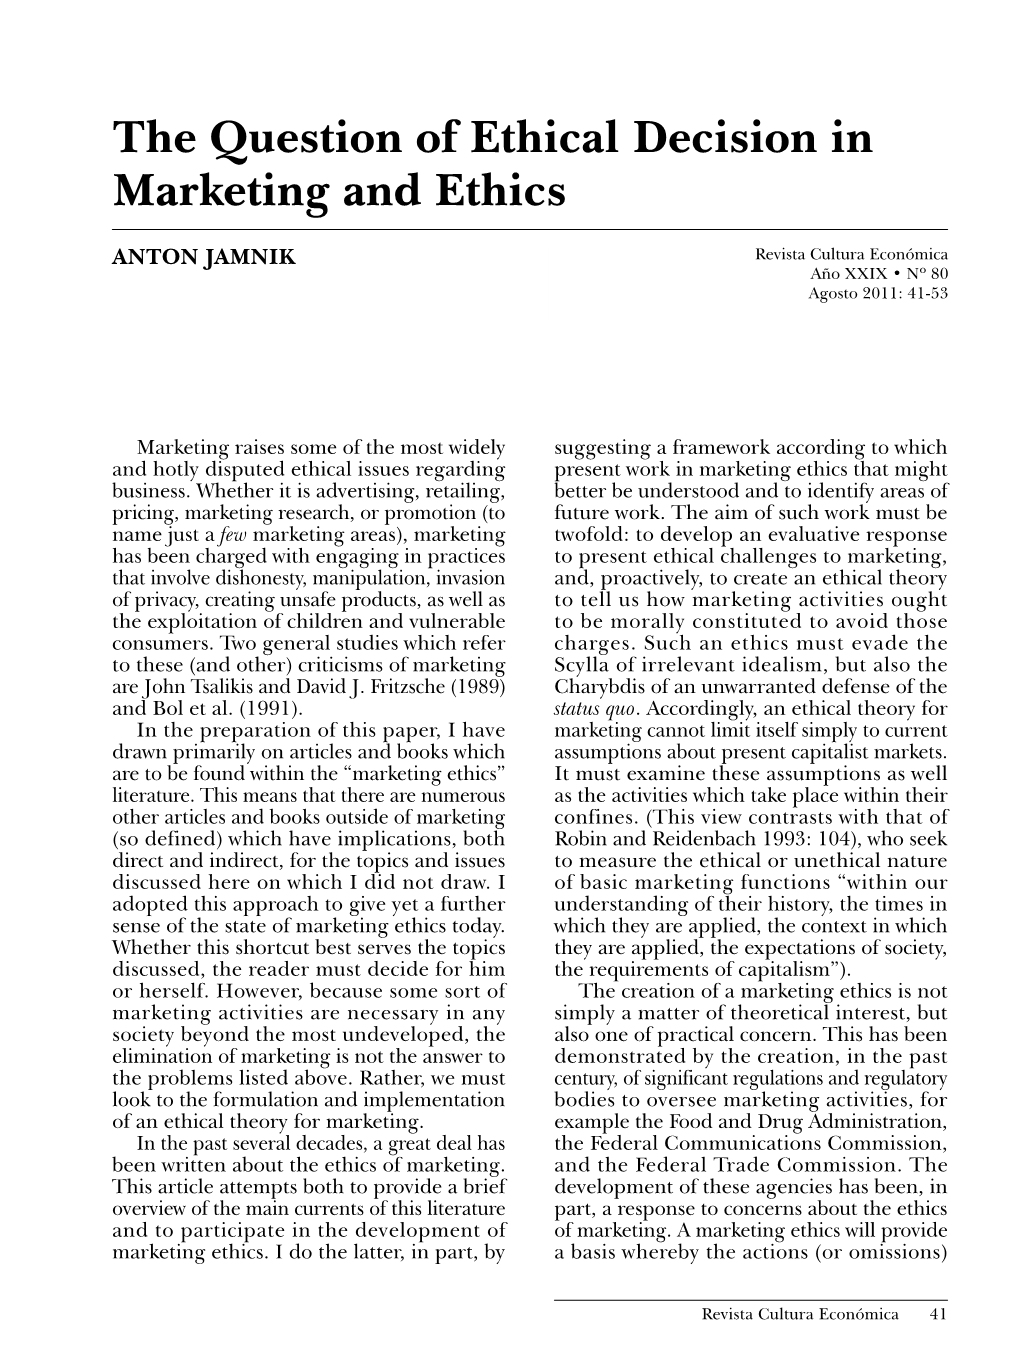 The Question of Ethical Decision in Marketing and Ethics